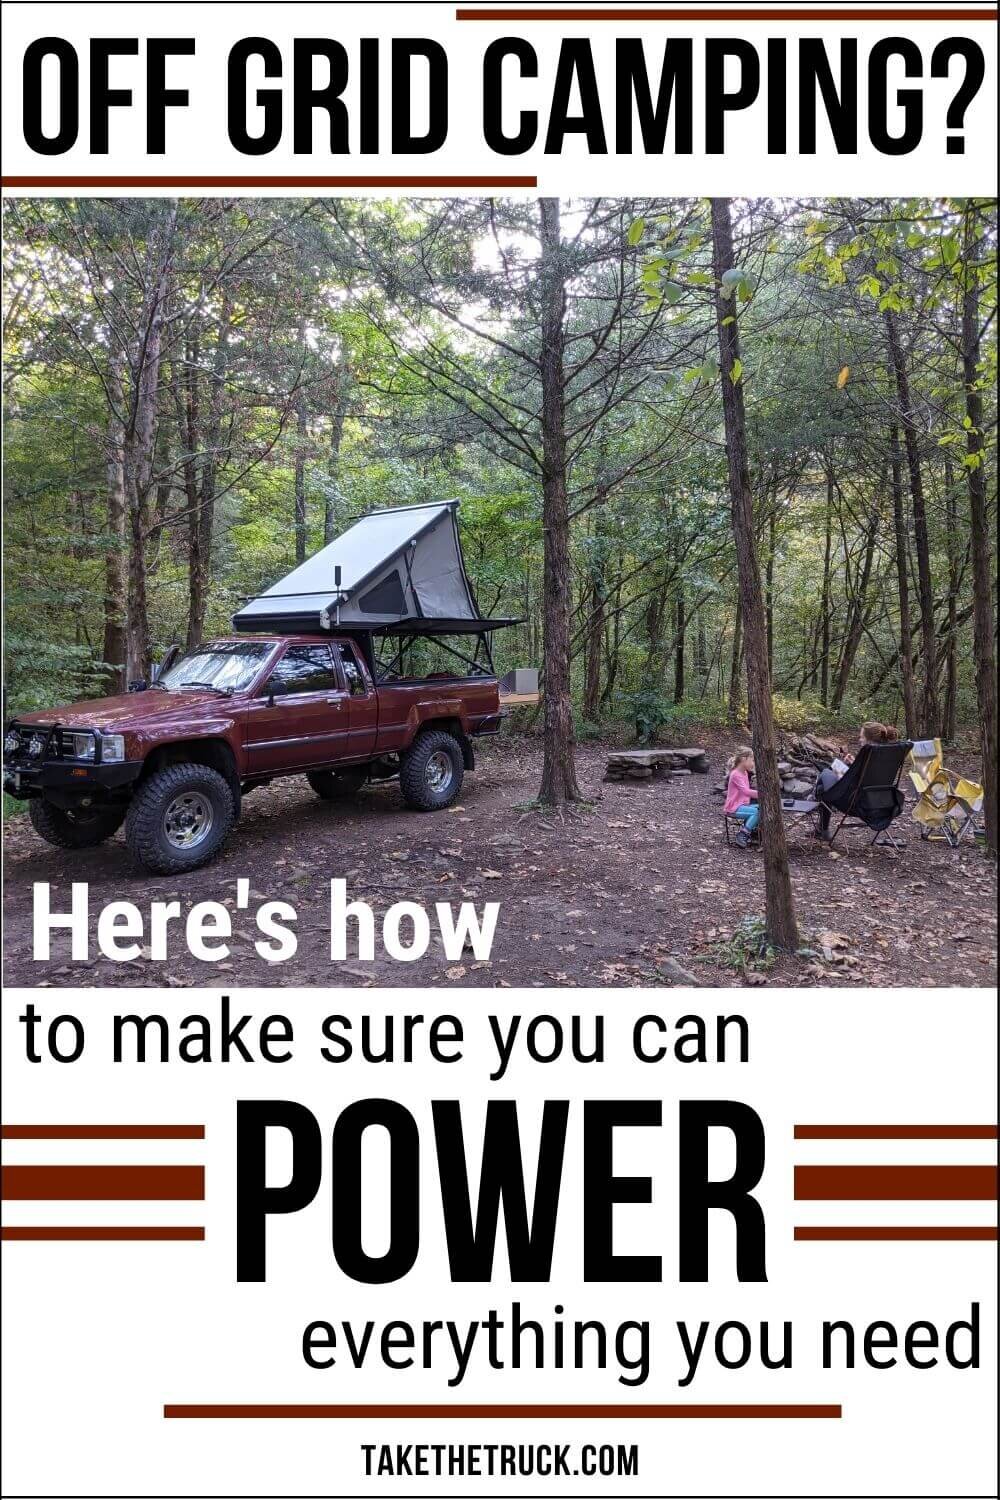 This post helps you calculate your power consumption while camping so you can select the right camping power supply for your needs, whether in a van, truck bed, suv, or other camper. 